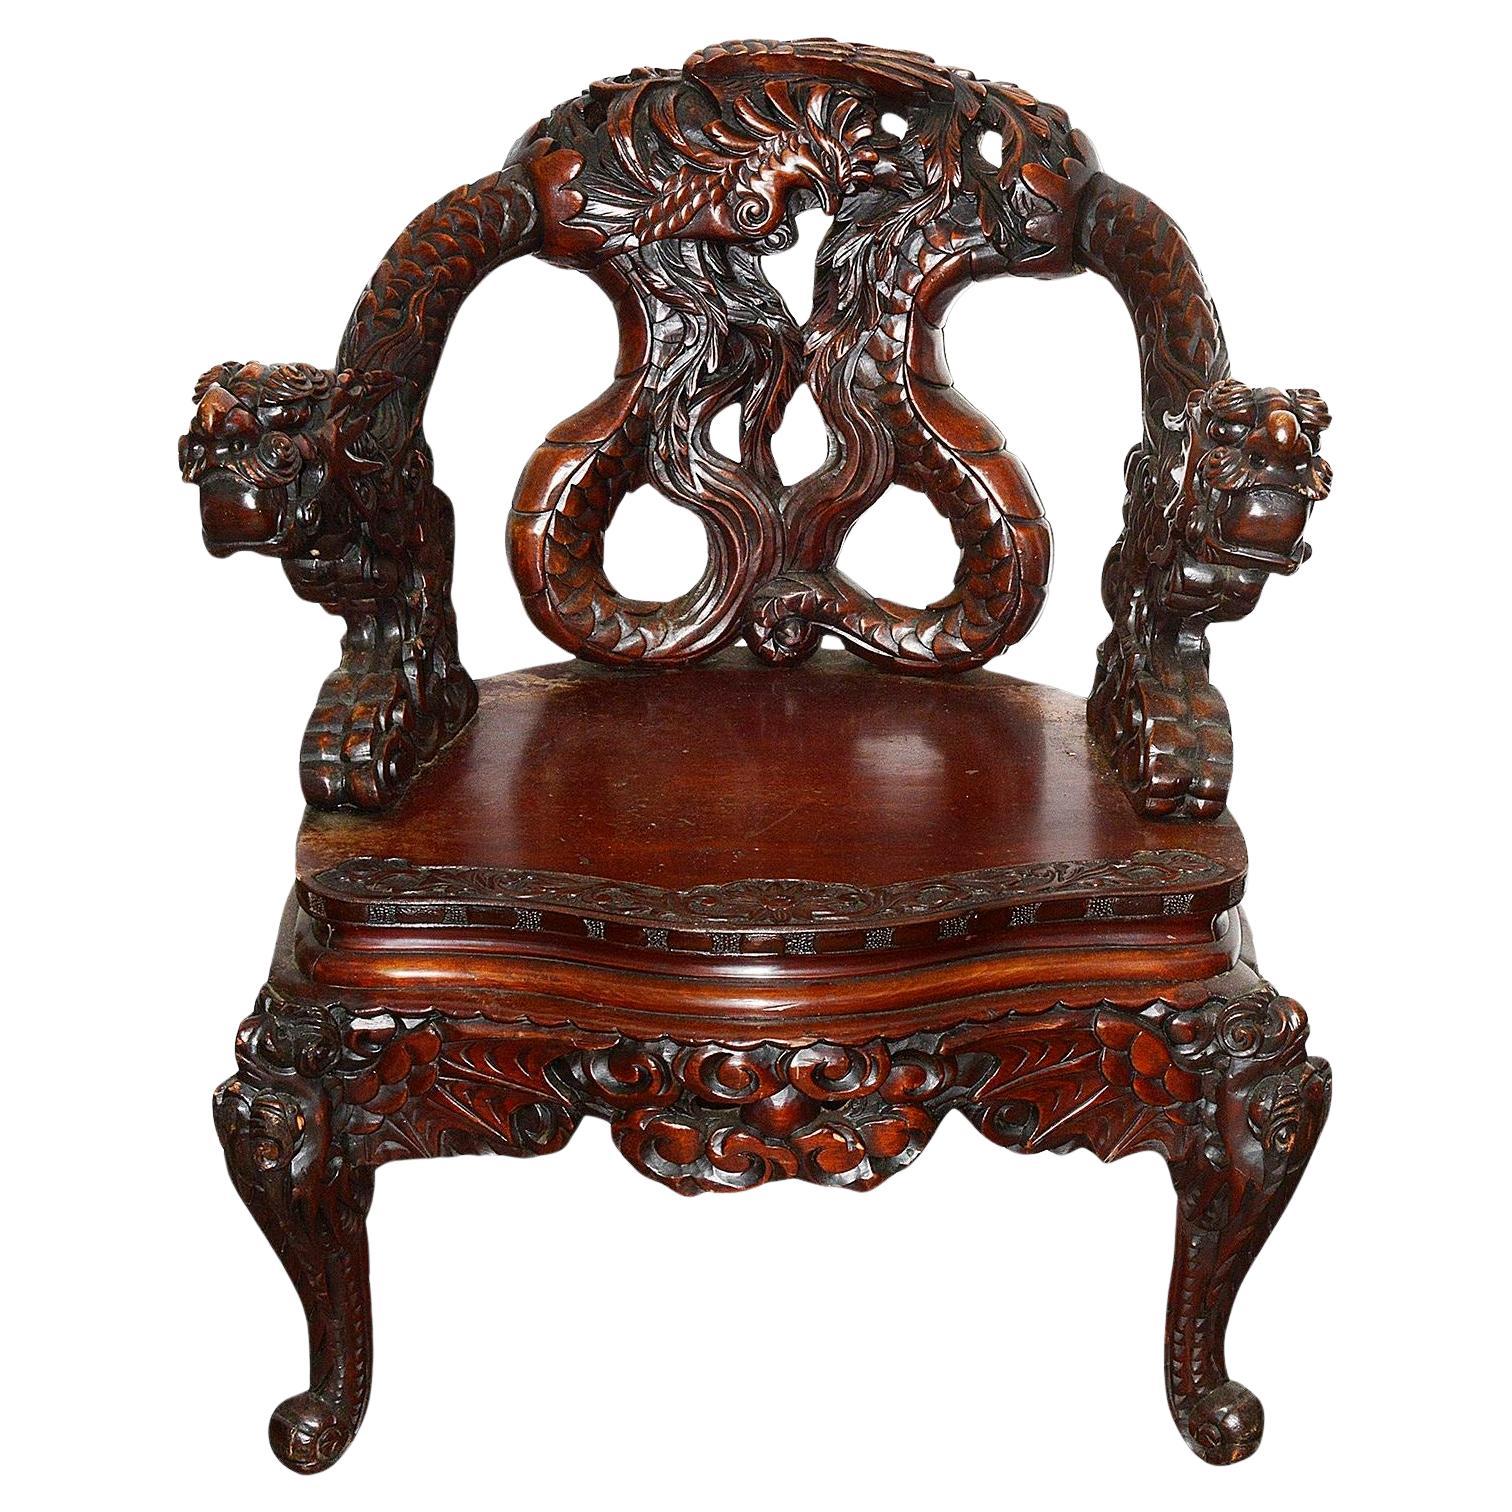 Late 19th Century Japanese carved wood arm chair